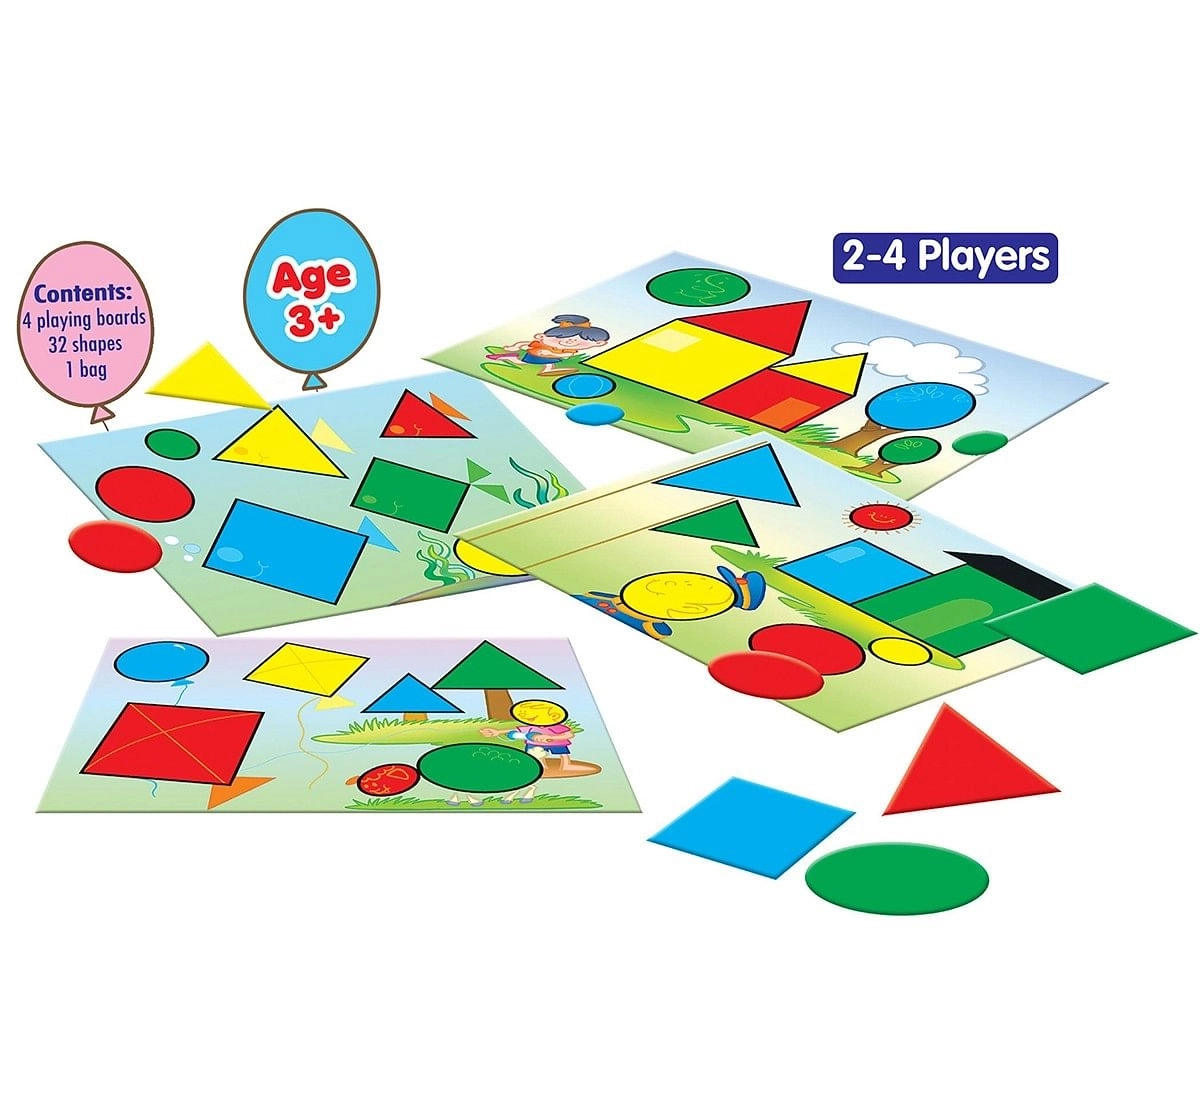 Frank My First Shape, Size And Colour Game Puzzles for Kids age 3Y+ 